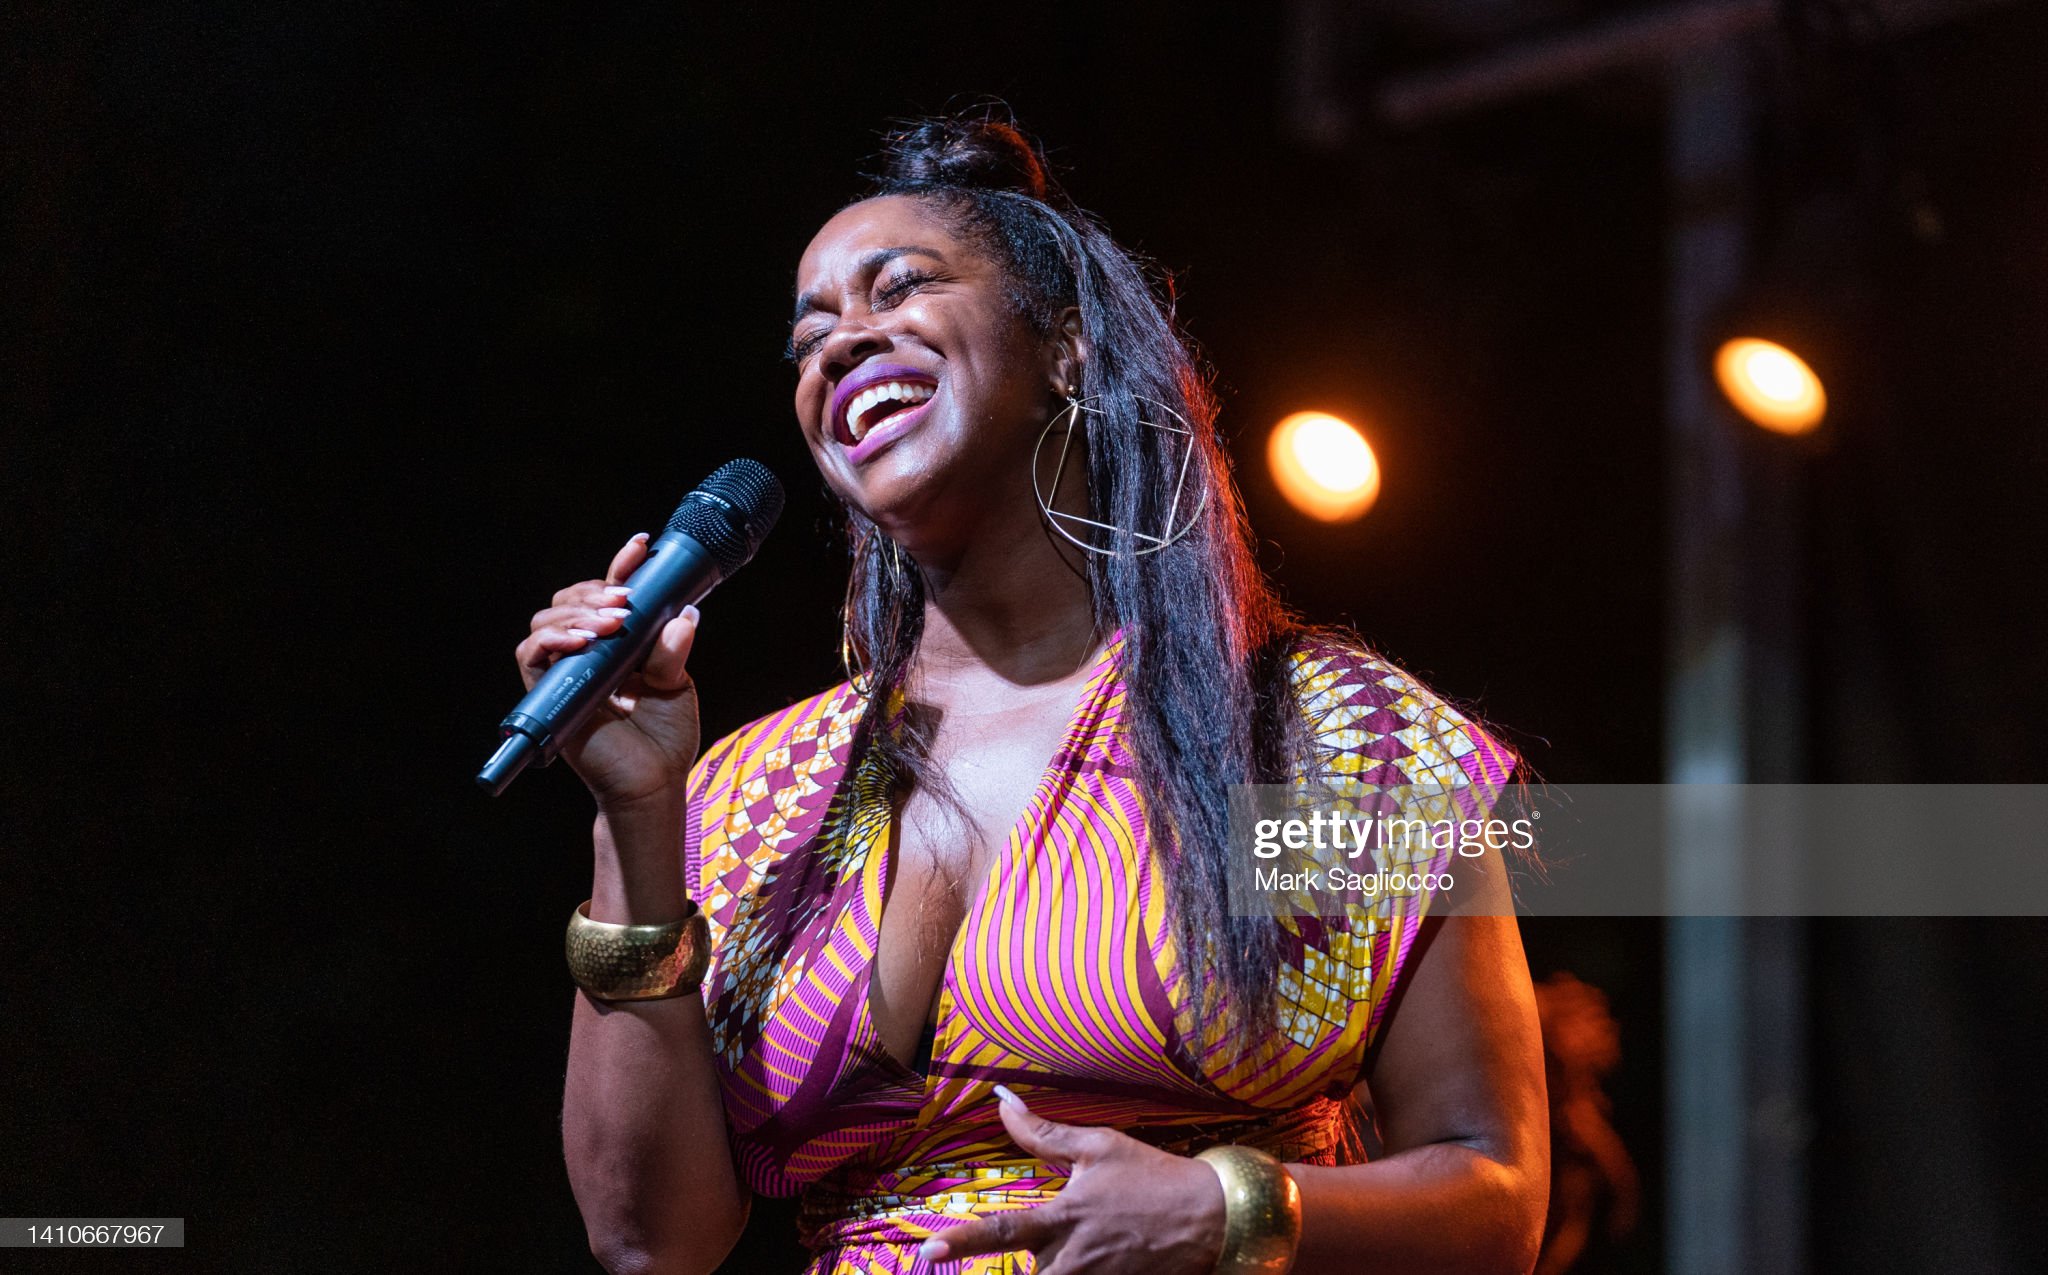 TOP 40 RBSOUL SingerSongwriter ESNAVI onstage at the Southampton Arts Center